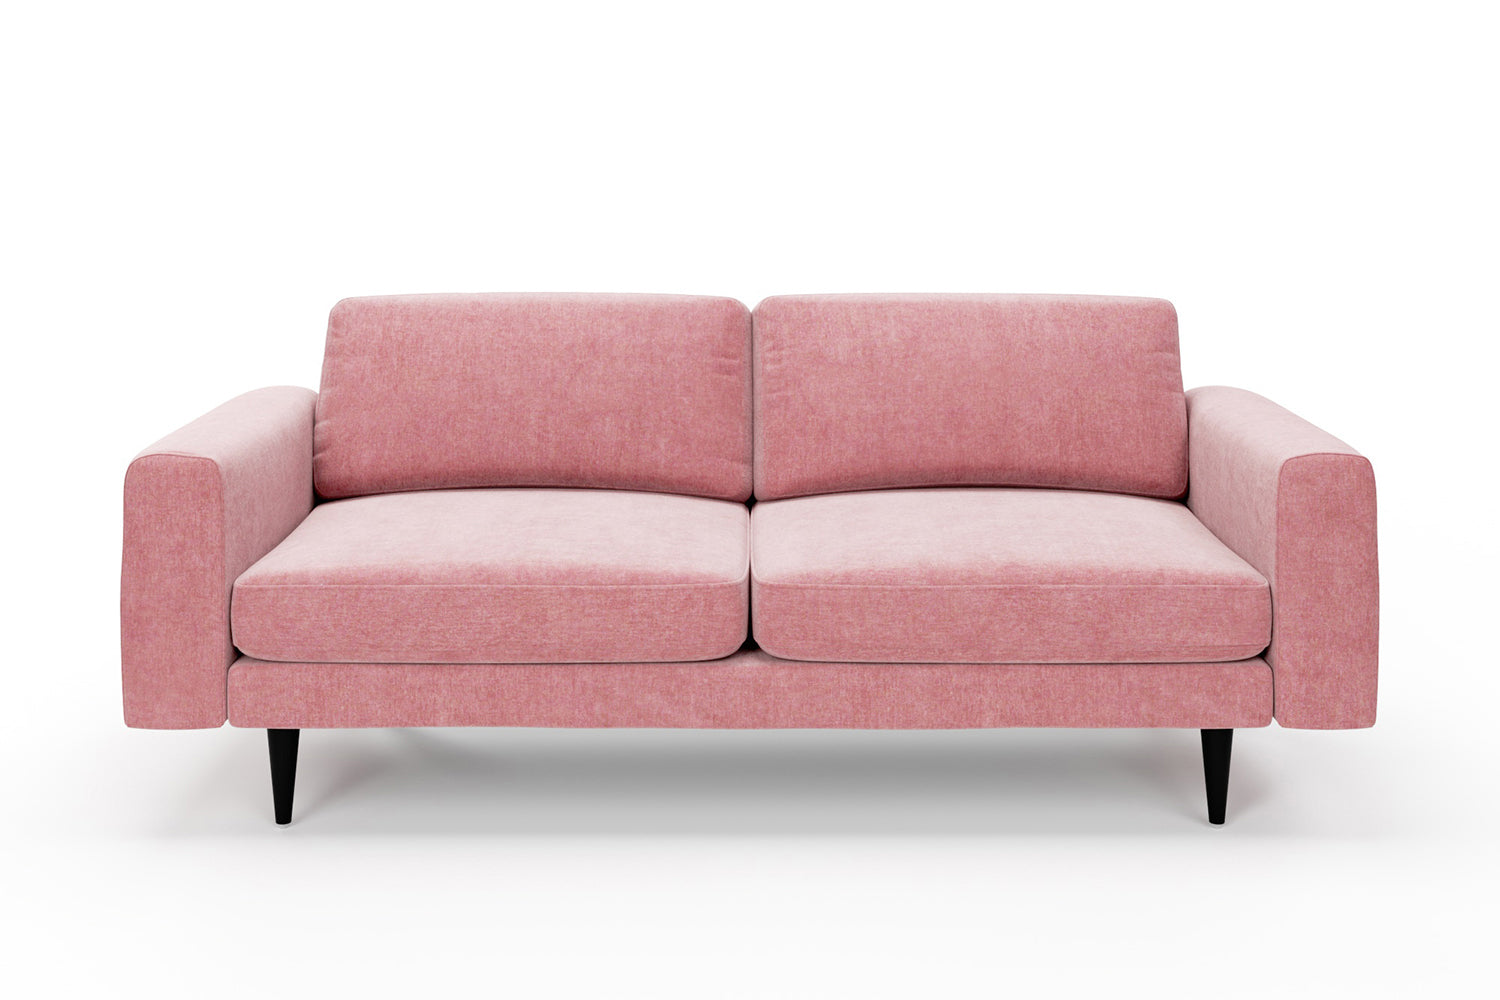 SNUG | The Big Chill 3 Seater Sofa in Blush Coral variant_40621895057456